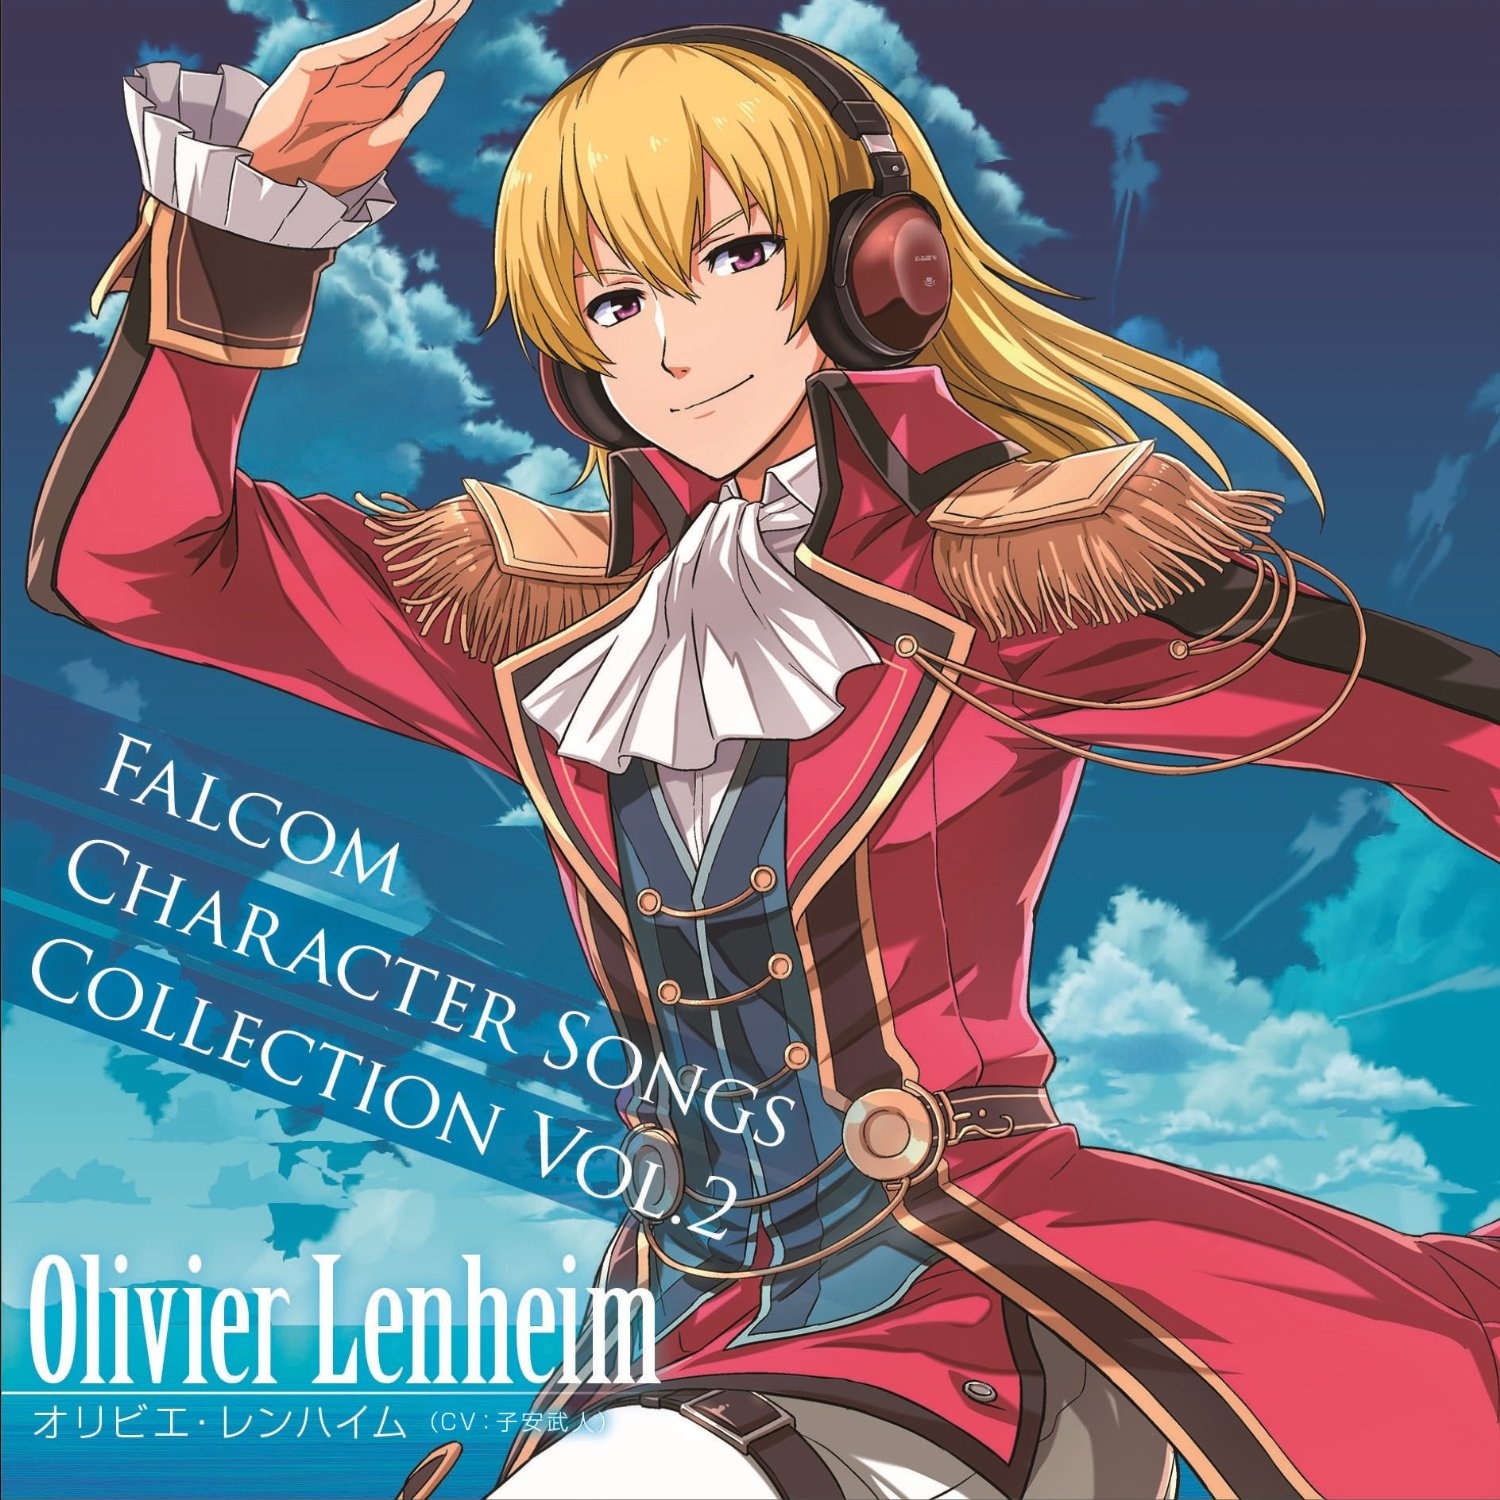 Falcom Character Songs Collection Vol. 2